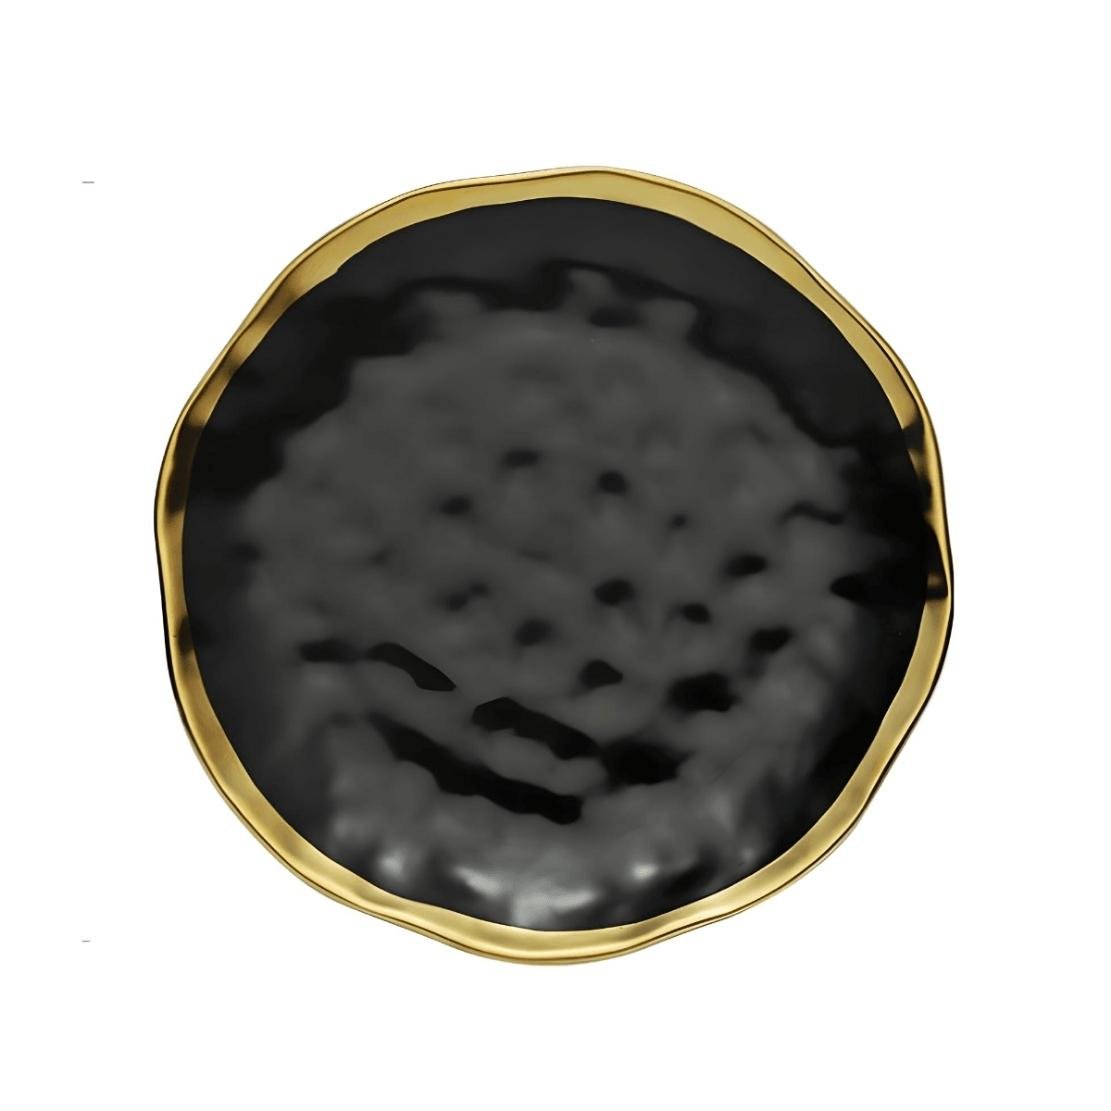 Embossed black porcelain plate with gold rim